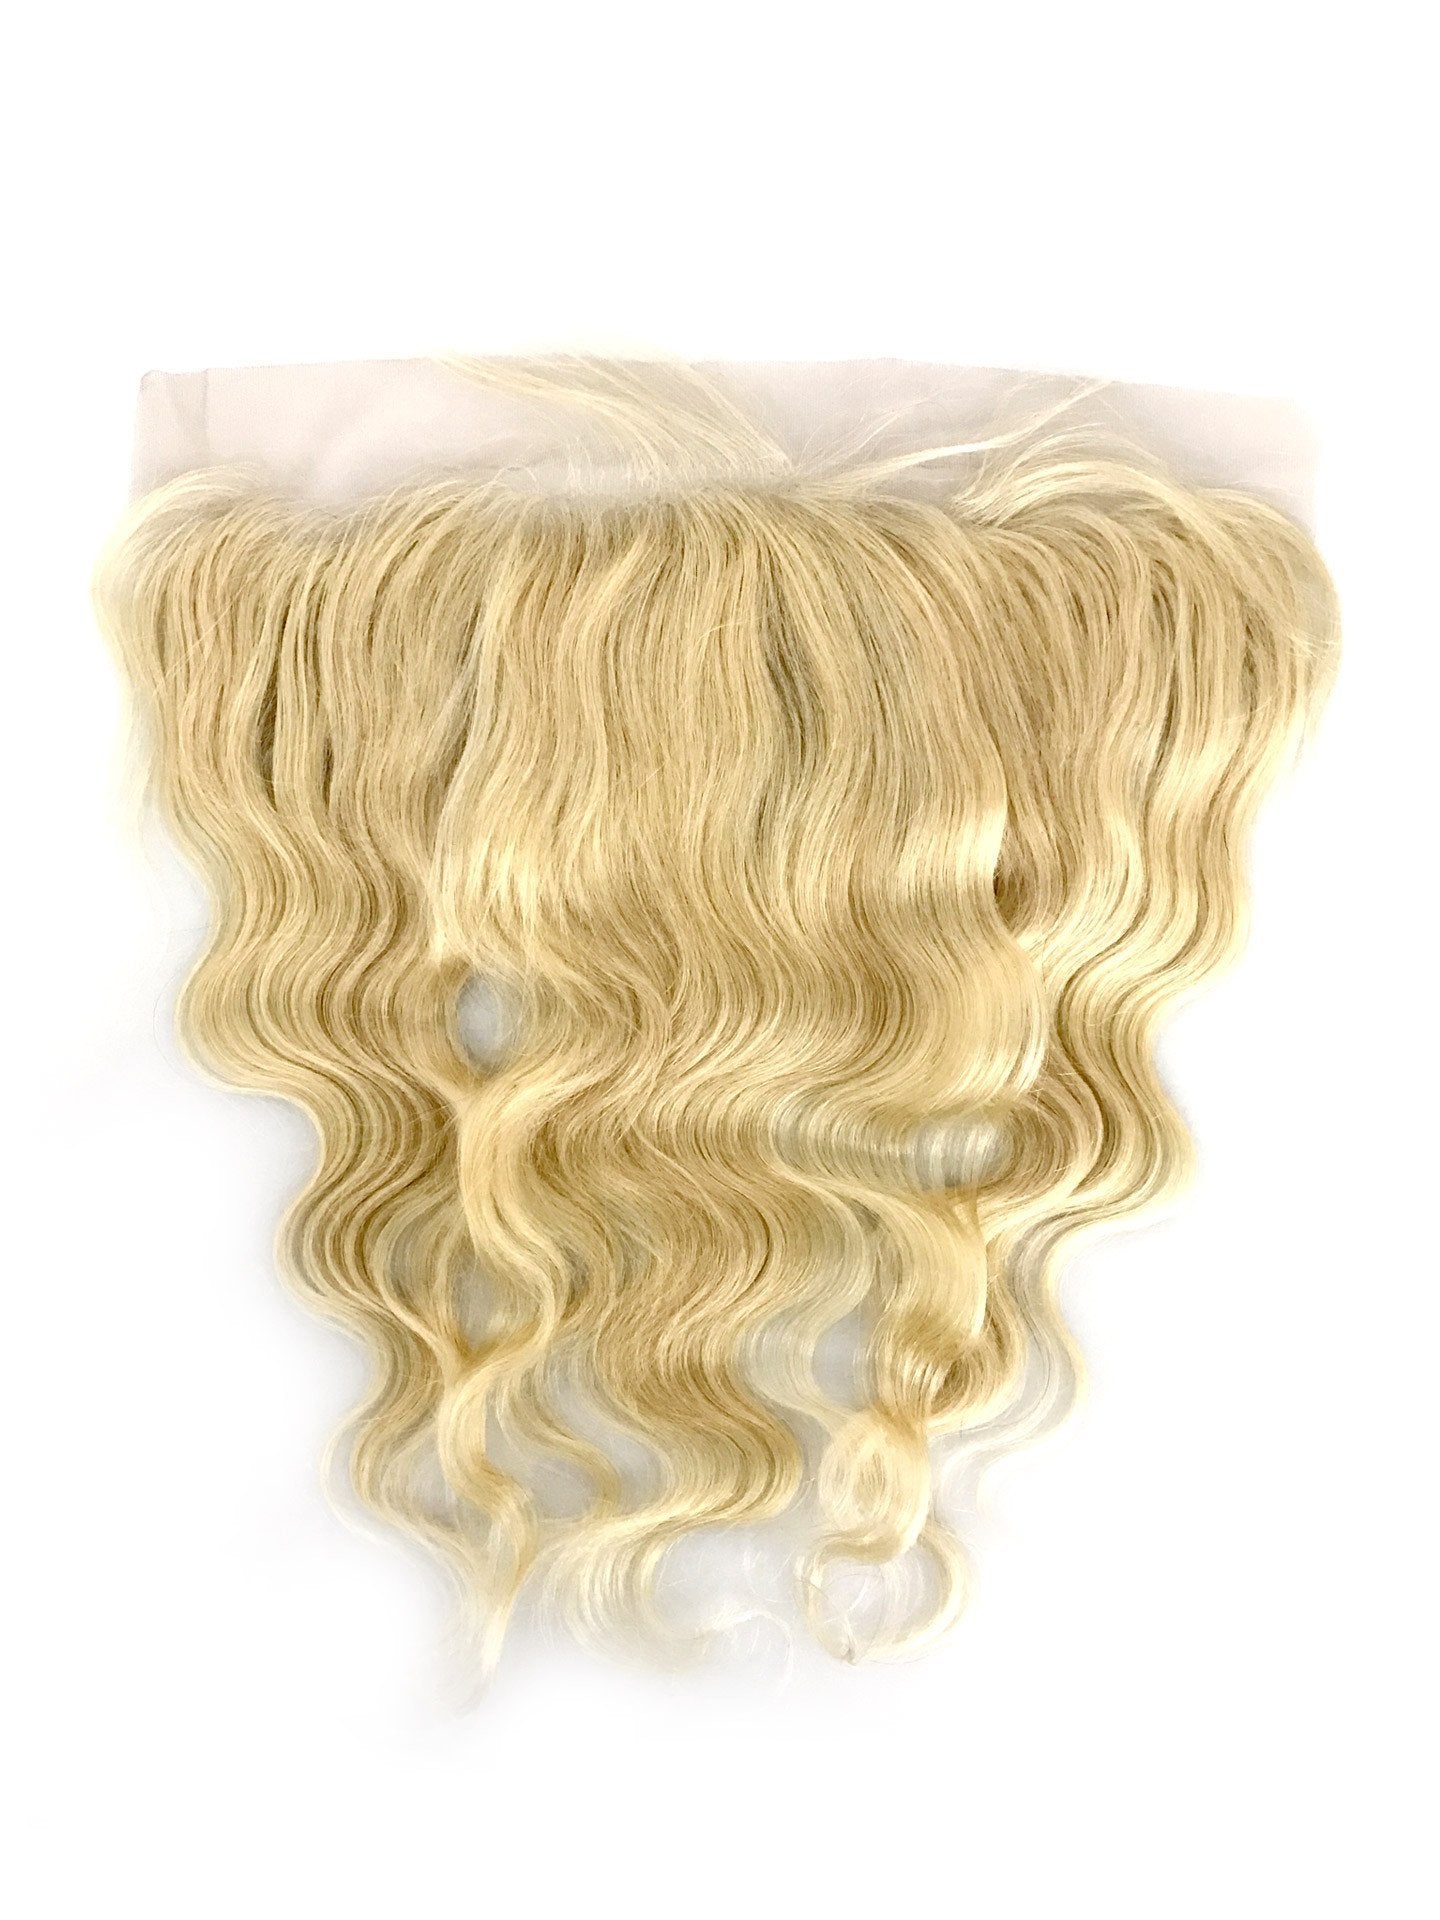 13"x4" Body Wave Lace Frontal 613 - eHair Outlet